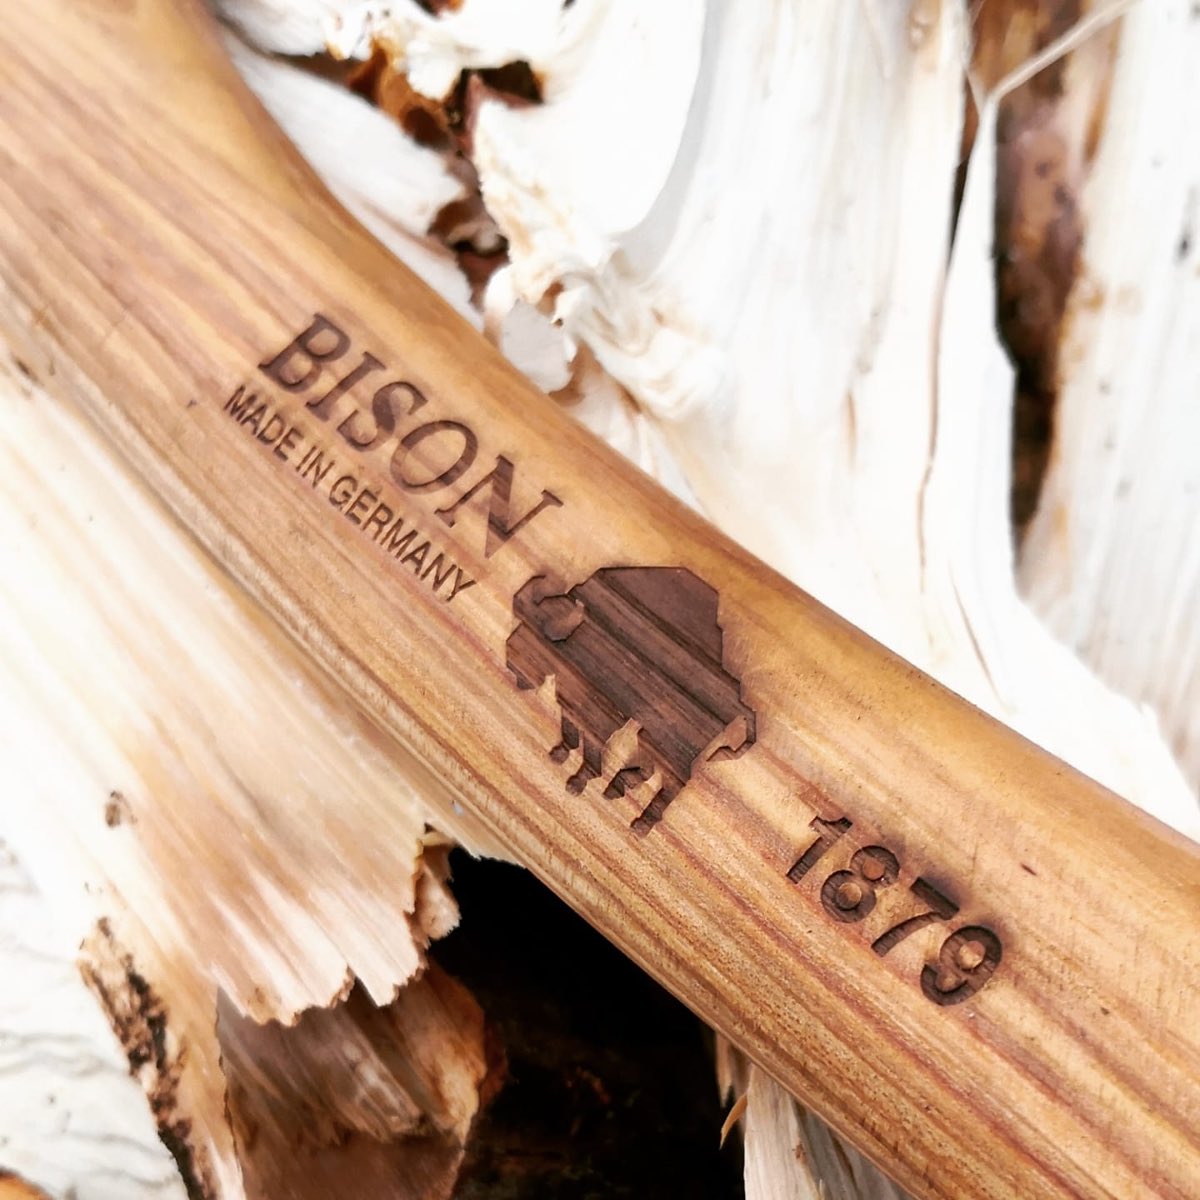 Handforged axes, crafted masterfully. Explore the Bison 1879 tools >> Link in our bio. - #outdoorprofessionalproducts #bison1879 #bison #handforgedaxes #handforged #axes #bushcraft #arb #arborist #arboriculture #forestry #outdoors